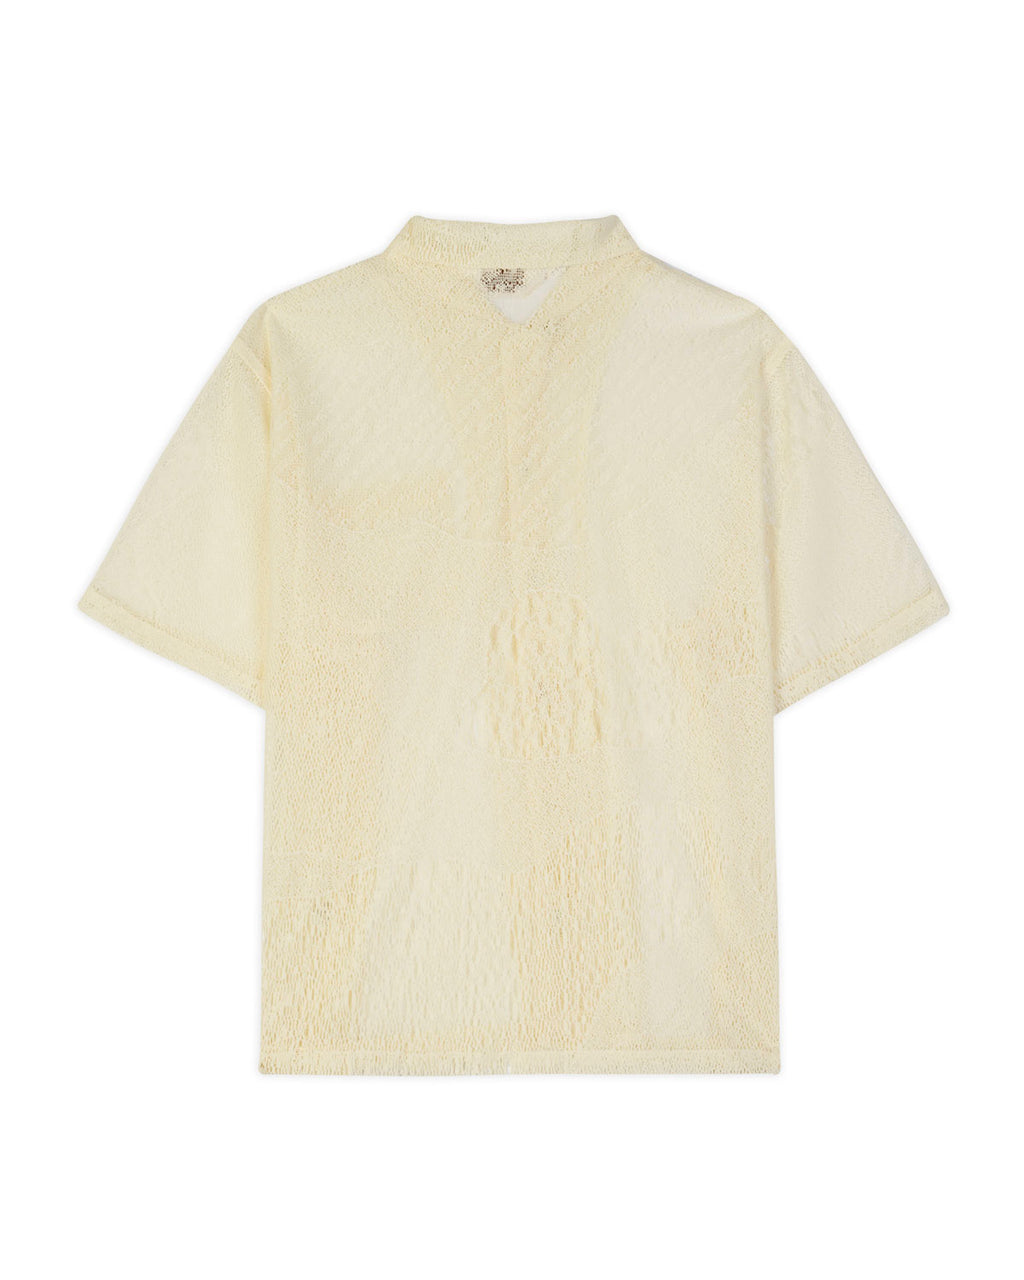 Engineered Mesh Short Sleeve Button Up - Natural 2